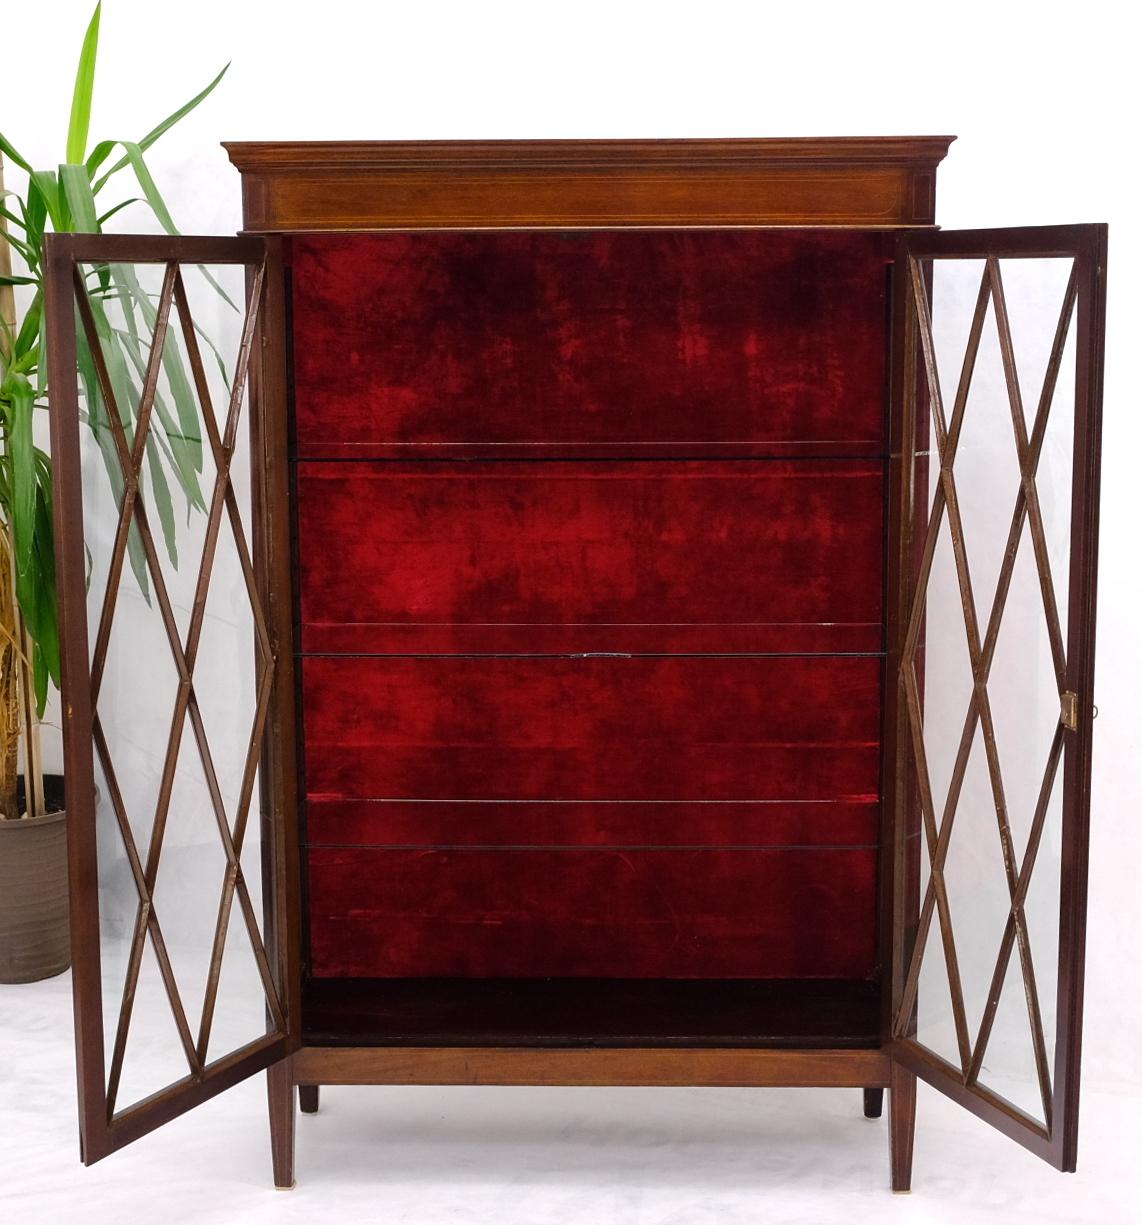 Federal Individual Glass Pane Double Doors Pencil Inlay Flame Mahogany Show Case For Sale